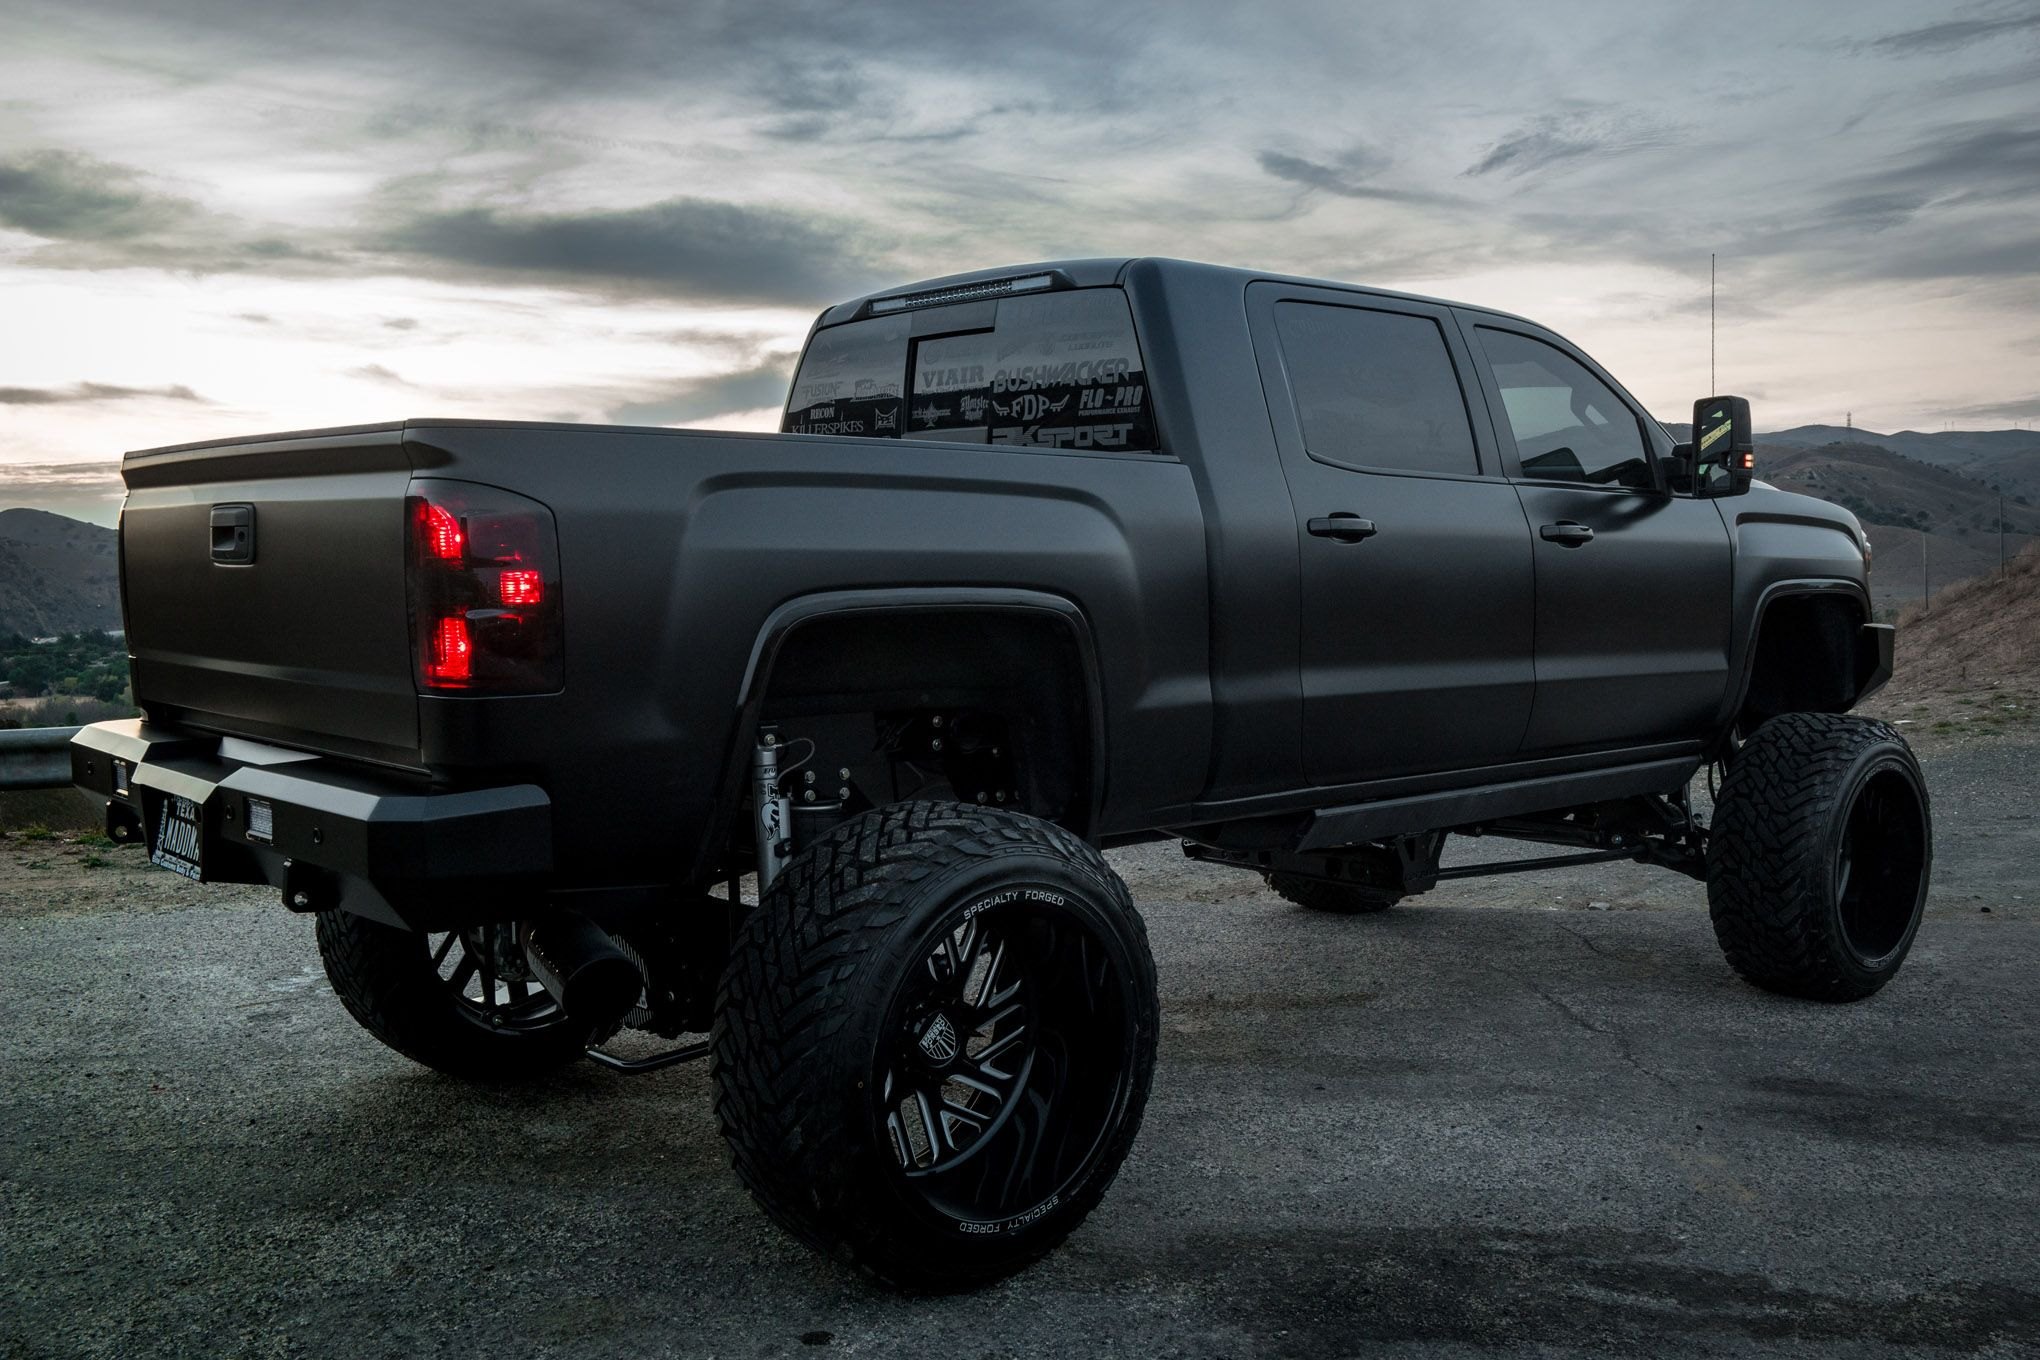 Black Lifted GMC Sierra Denali with Red LED Taillights - Photo by Jason Mulligan